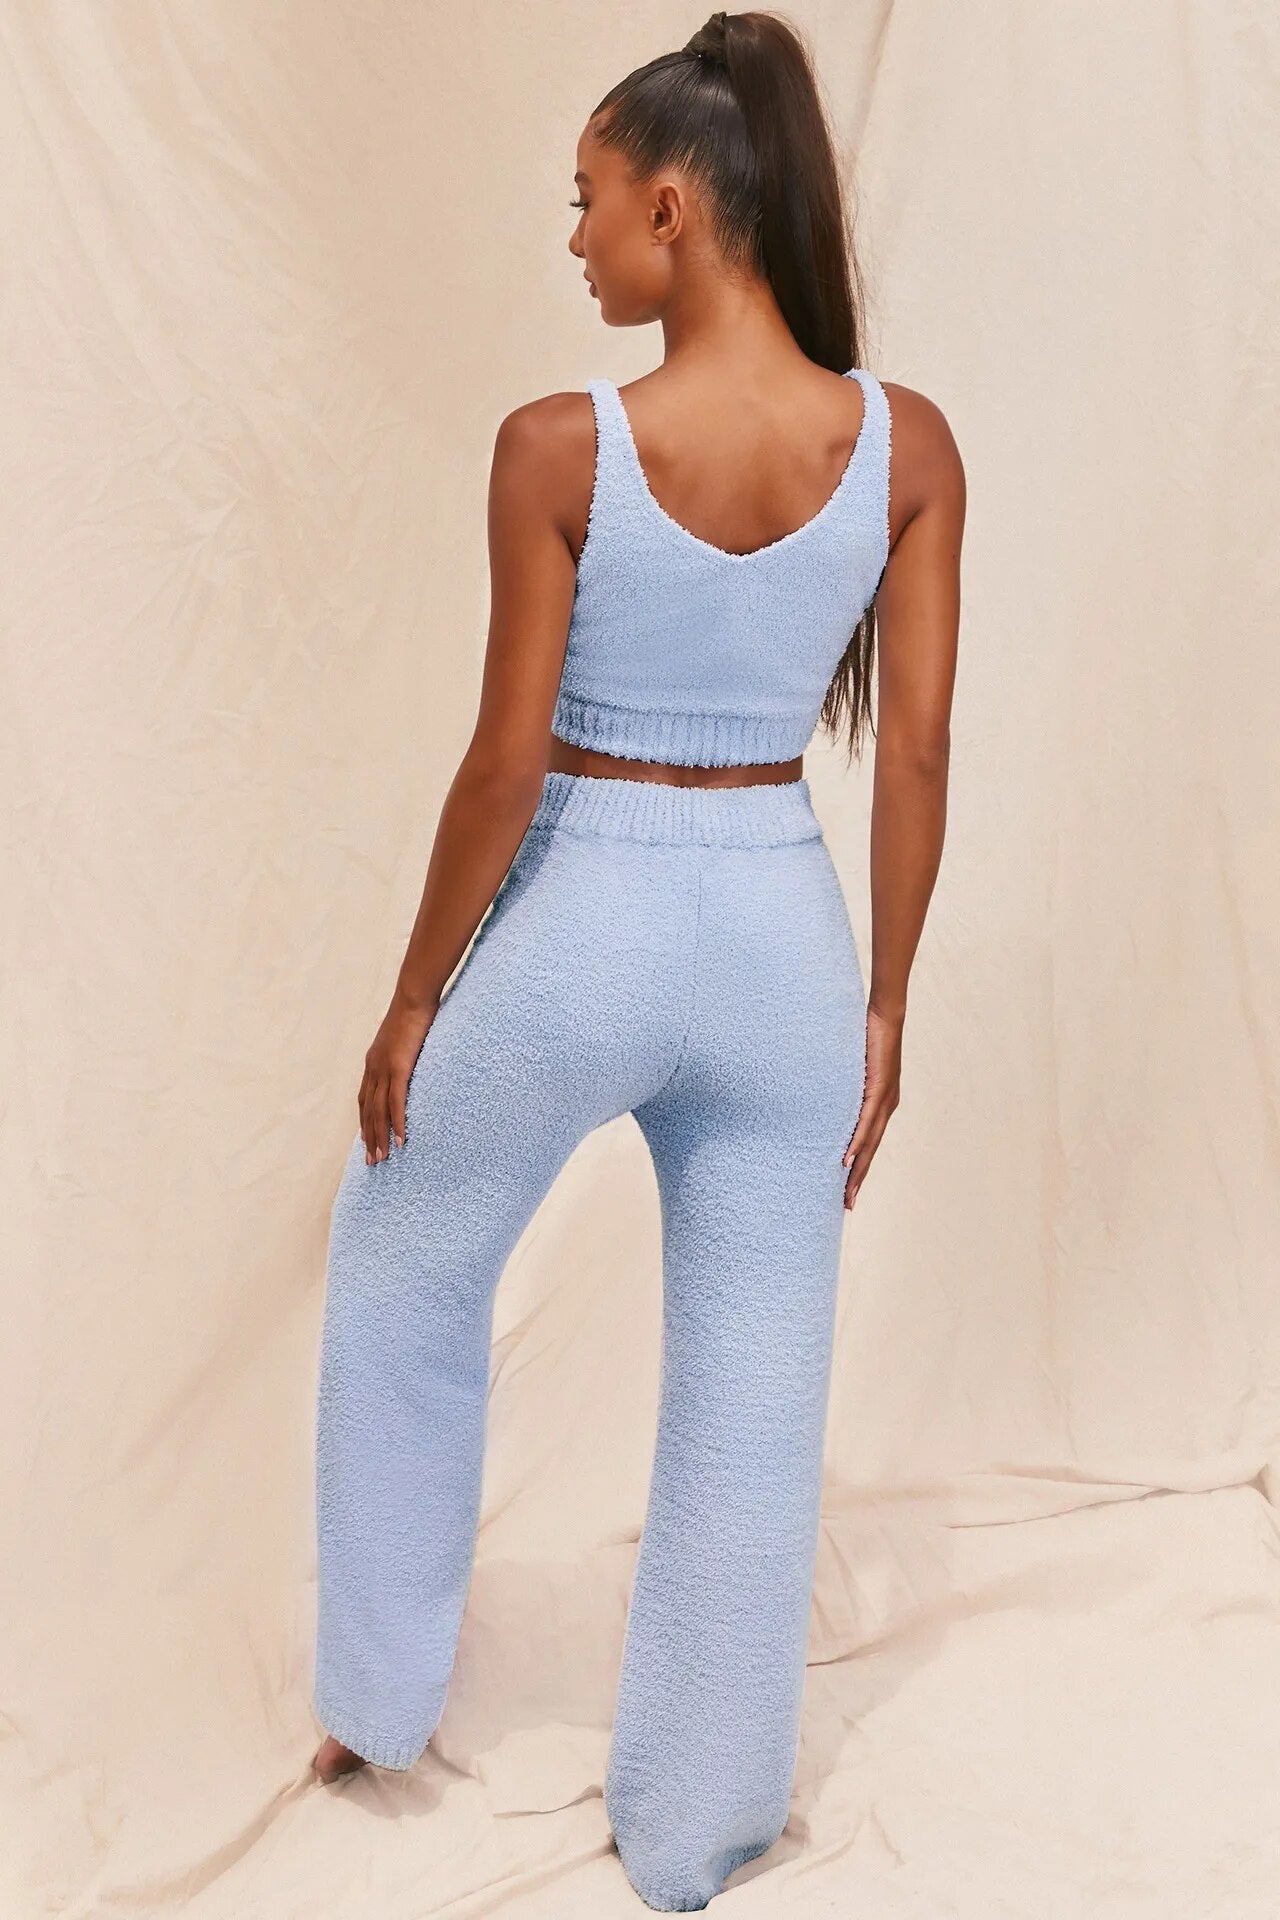 Fluffy Two Piece Set Loungewear - Tank Top And Pants Casual Home Wear Outfits - BEYOND